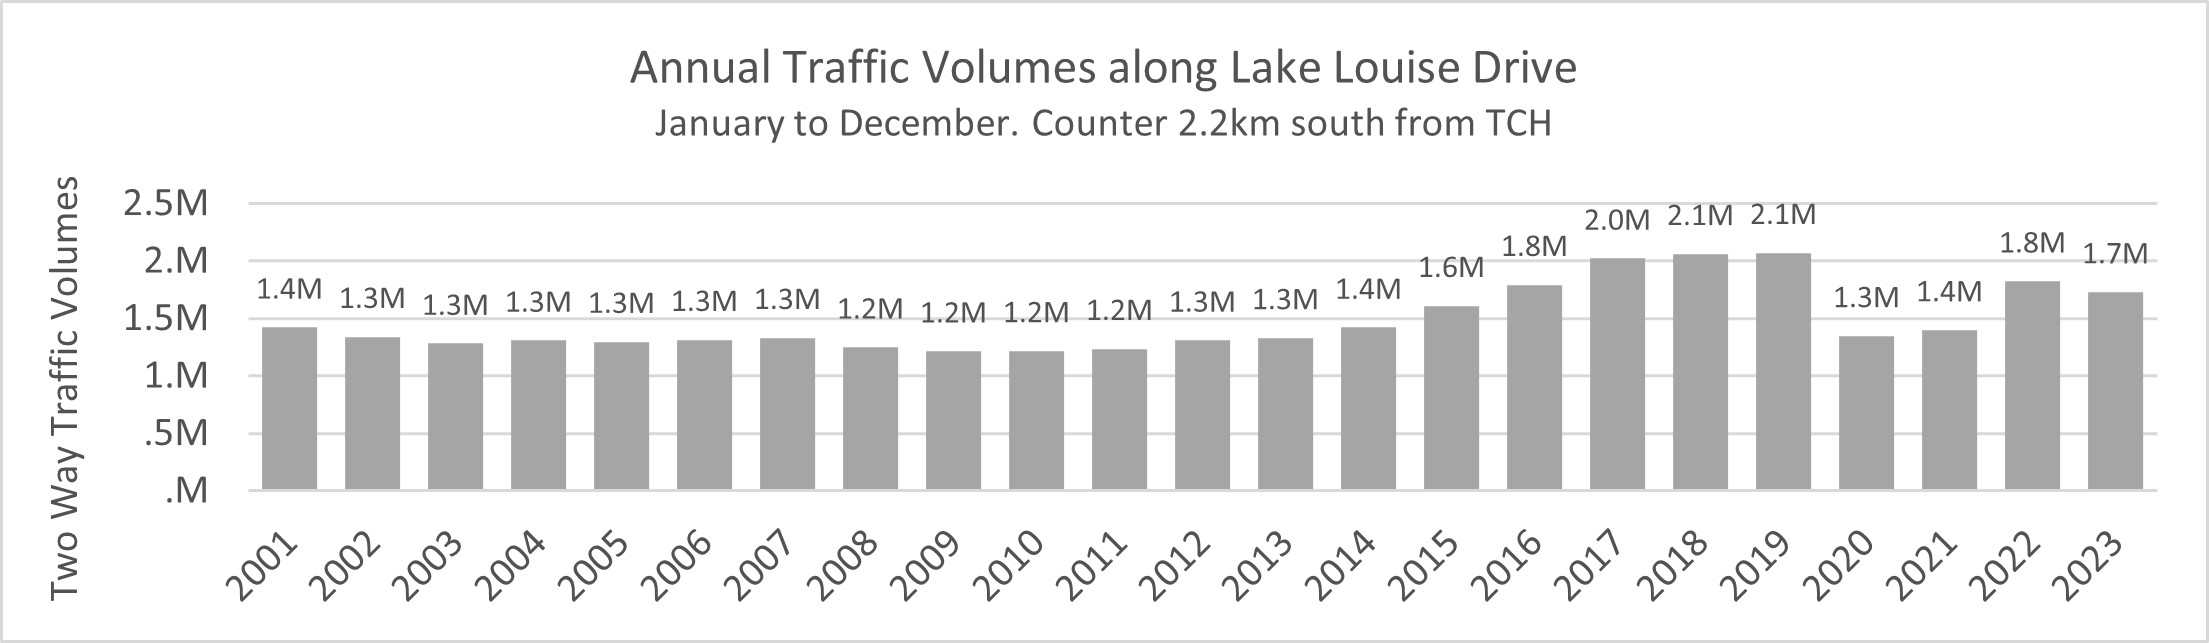 Graphic of Annual Traffic Volumes along Lake Louise Drive, January to December. Counter located 2.2km south of Trans-Canada Highway. More details provided in the text version below. 